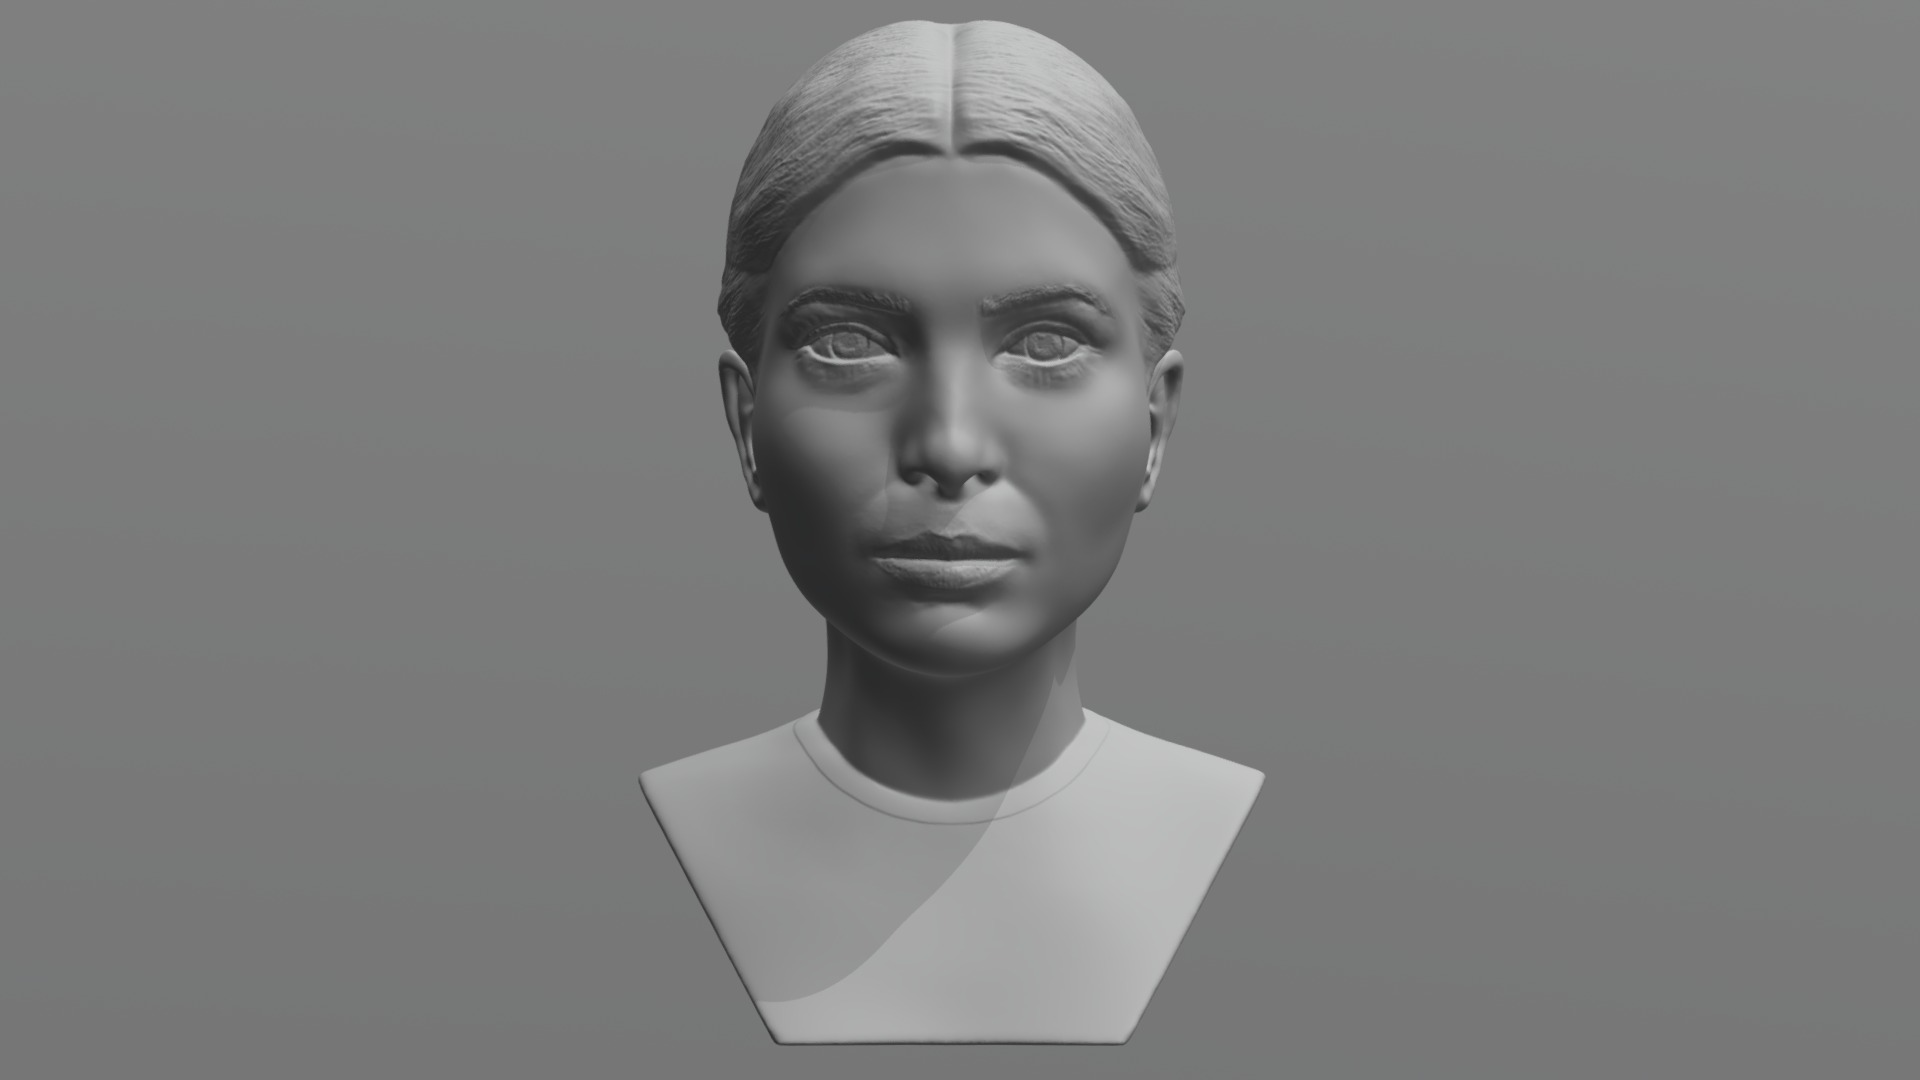 3D model Ivanka Trump bust for 3D printing - This is a 3D model of the Ivanka Trump bust for 3D printing. The 3D model is about a person with a white shirt.